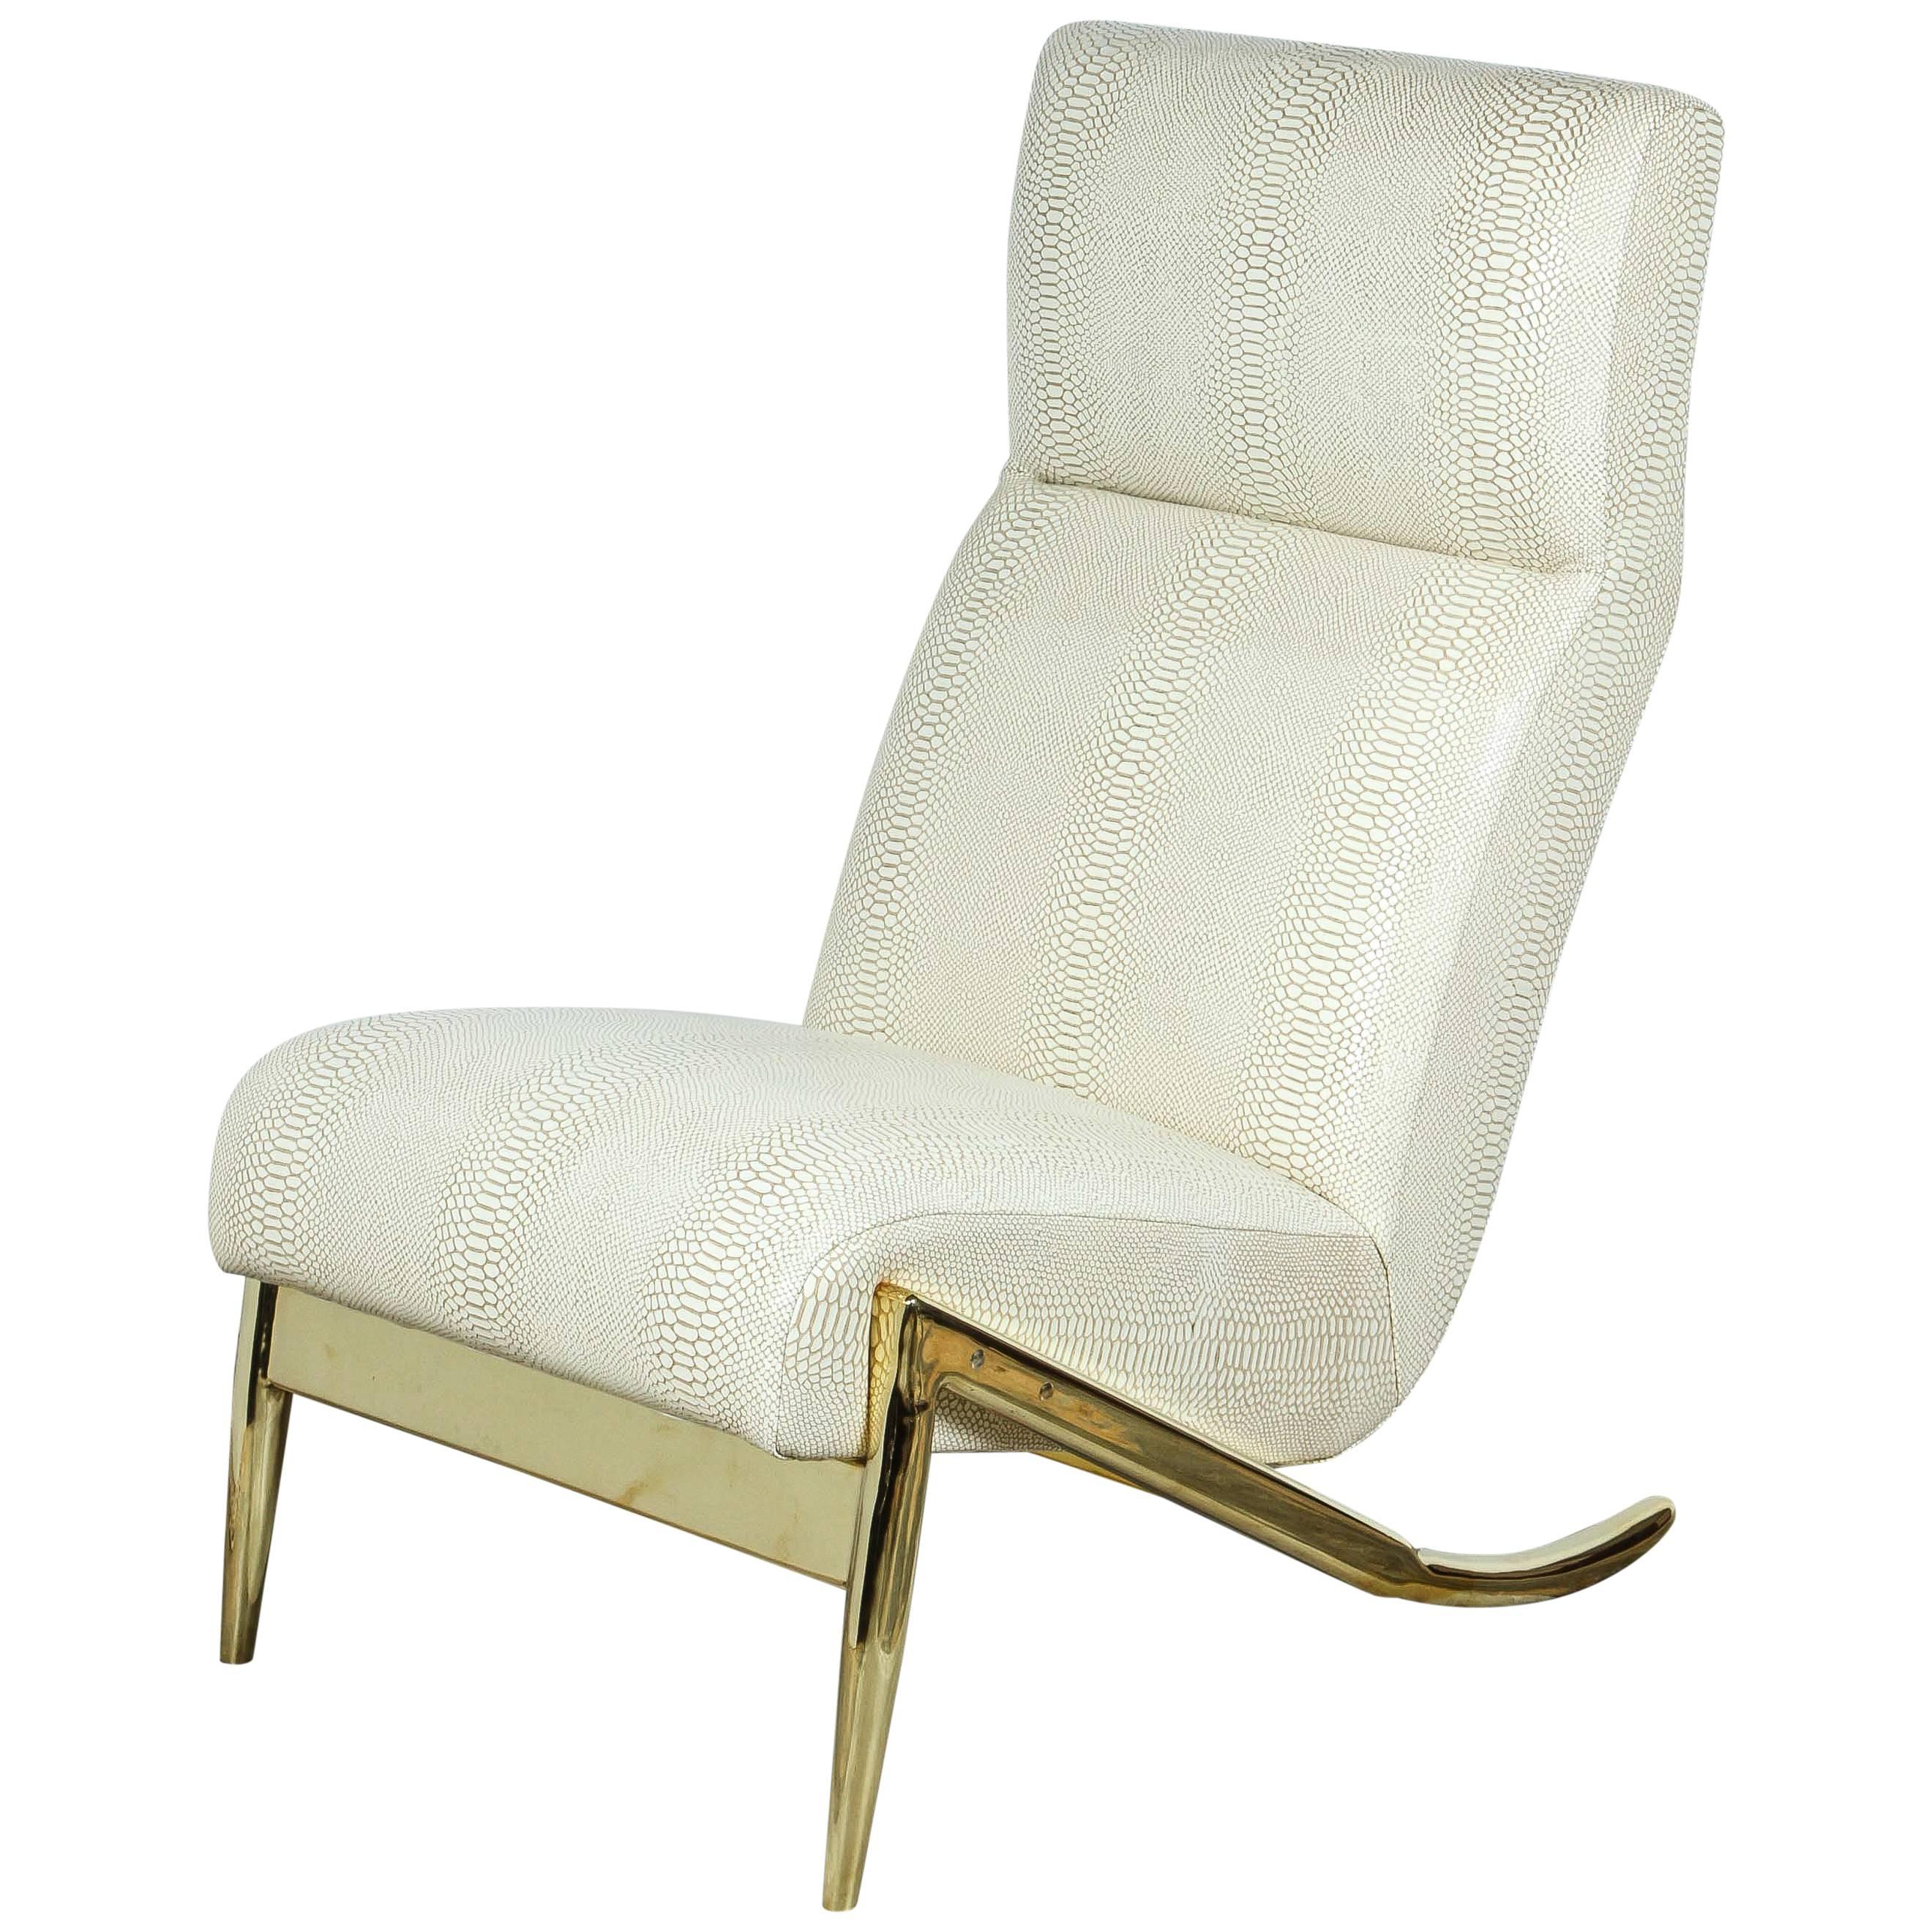 Paul Marra Slipper Chair in Brass with Faux Python For Sale